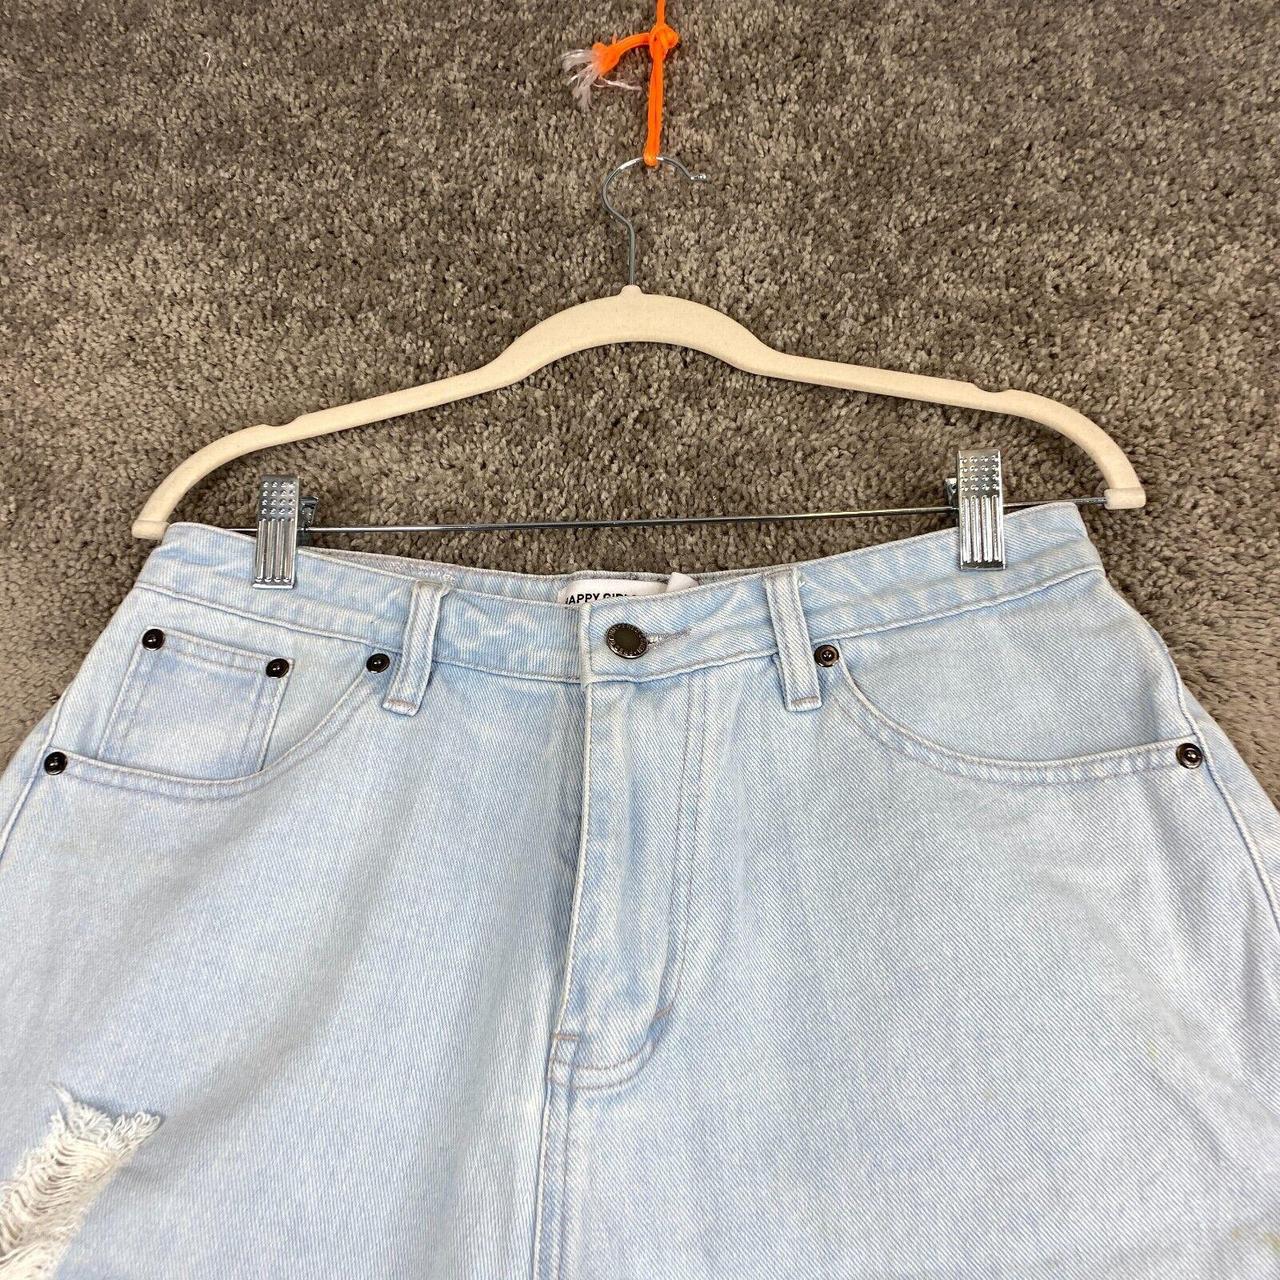 Product Image 2 - Fred Jean Shorts Womens Size